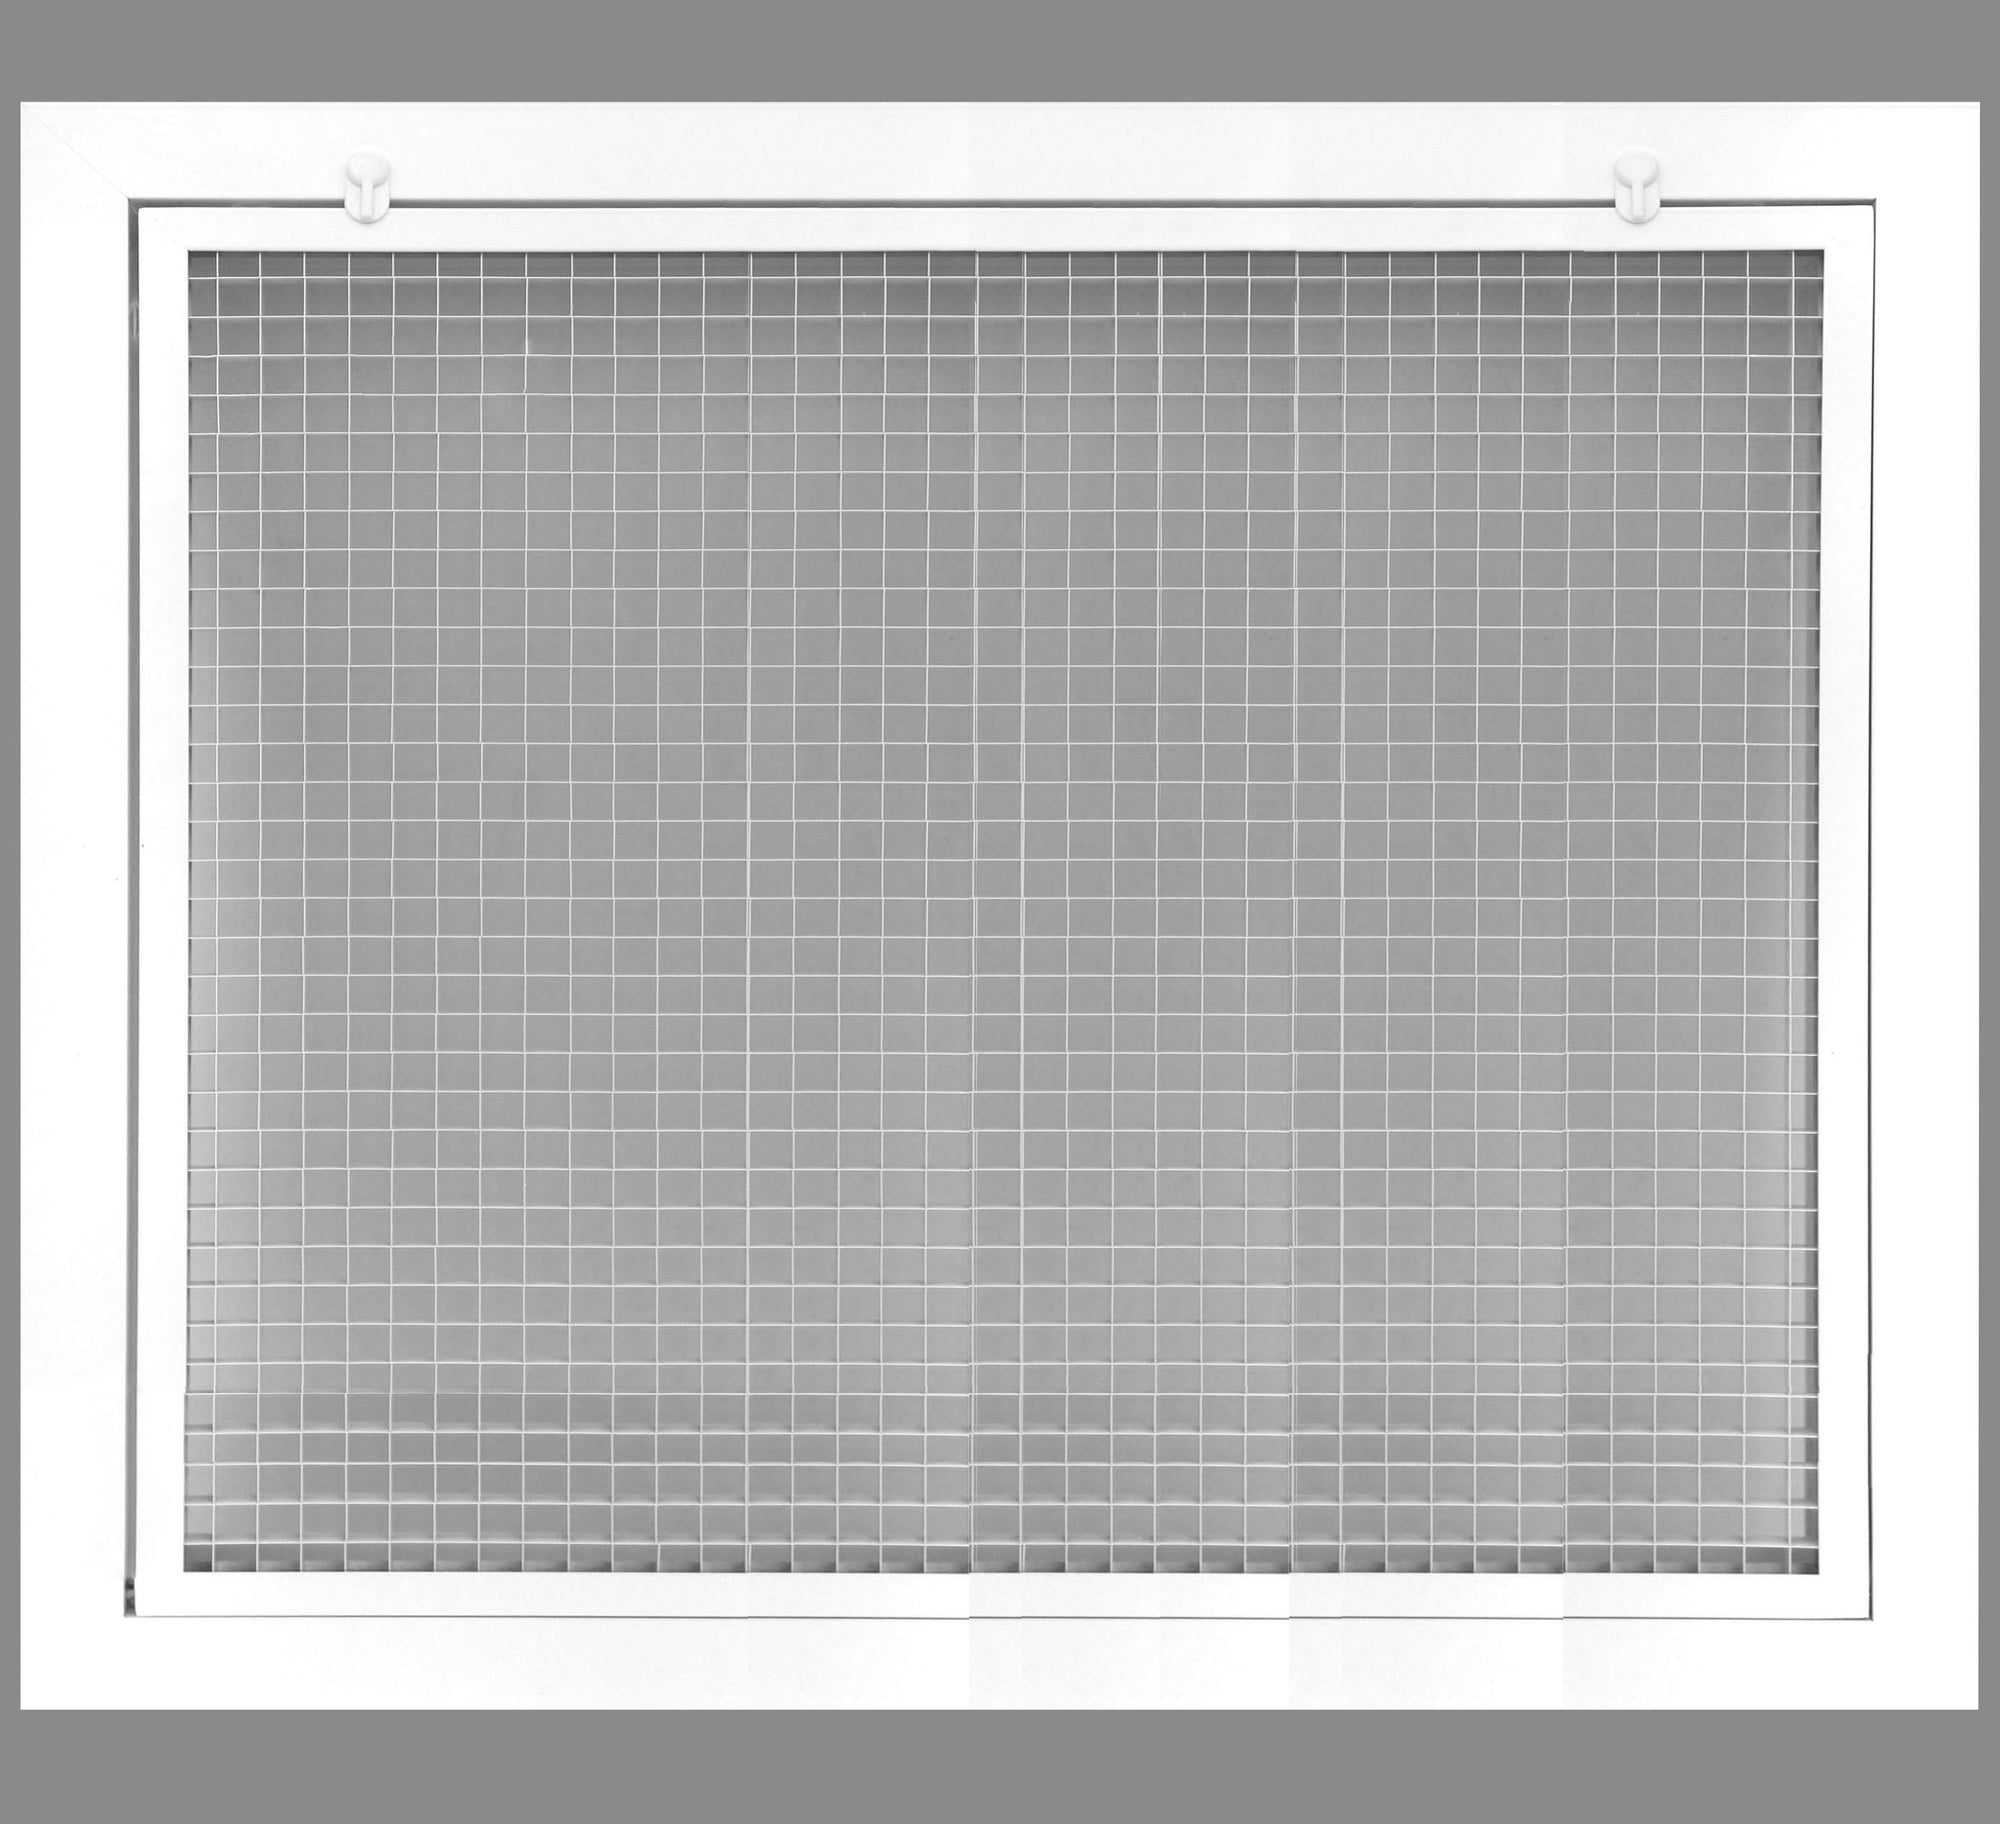 18" x 16" Cube Core Eggcrate Return Air Filter Grille for 1" Filter